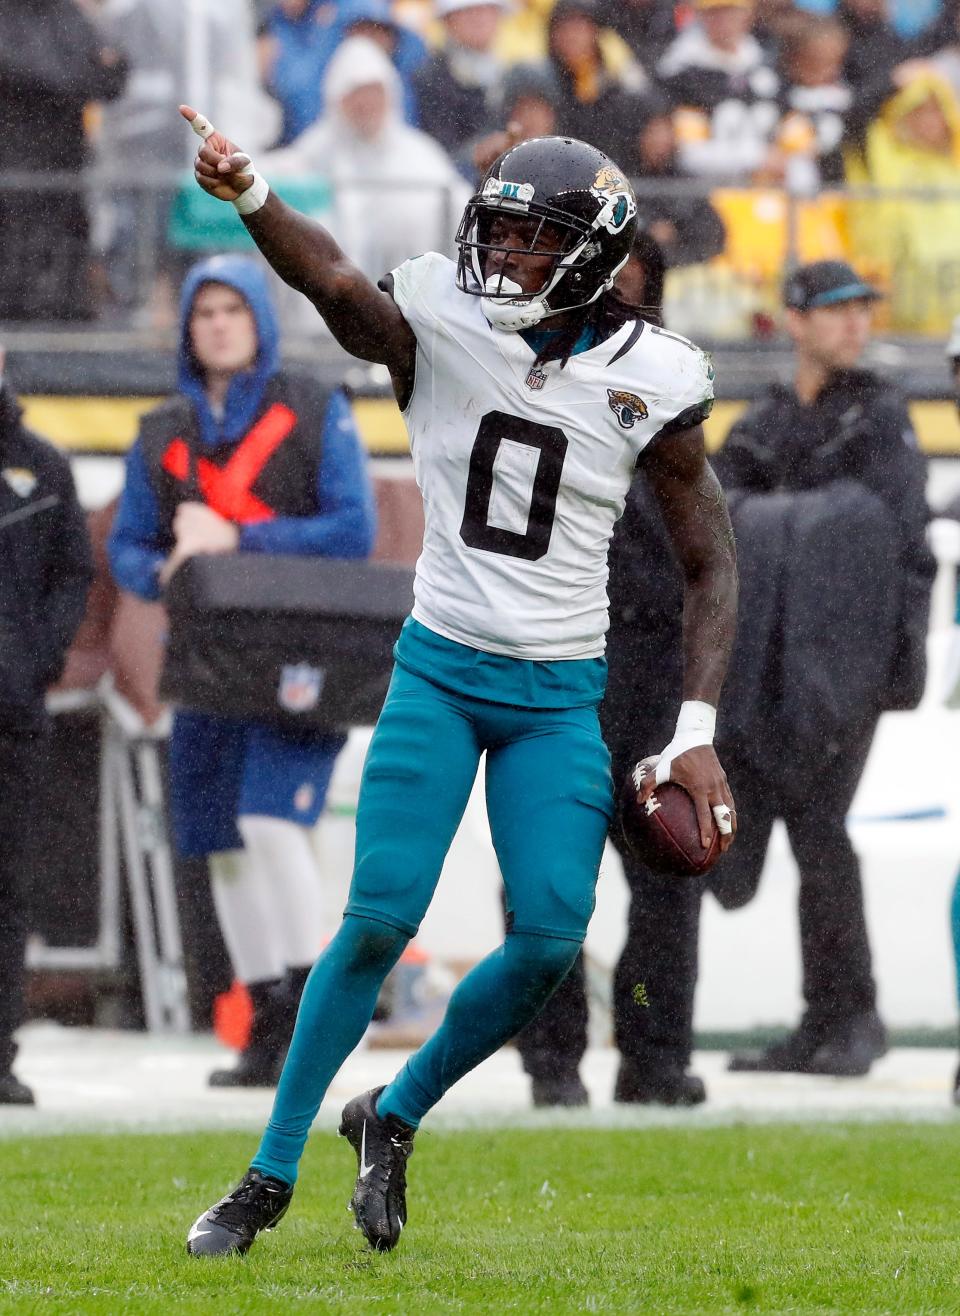 Jacksonville Jaguars receiver Calvin Ridley (0) will be an interesting offseason call for general manager Trent Baalke, who could opt to sign him to a long-term contract or put the franchise tag on him to keep Ridley around for at least the 2024 season.